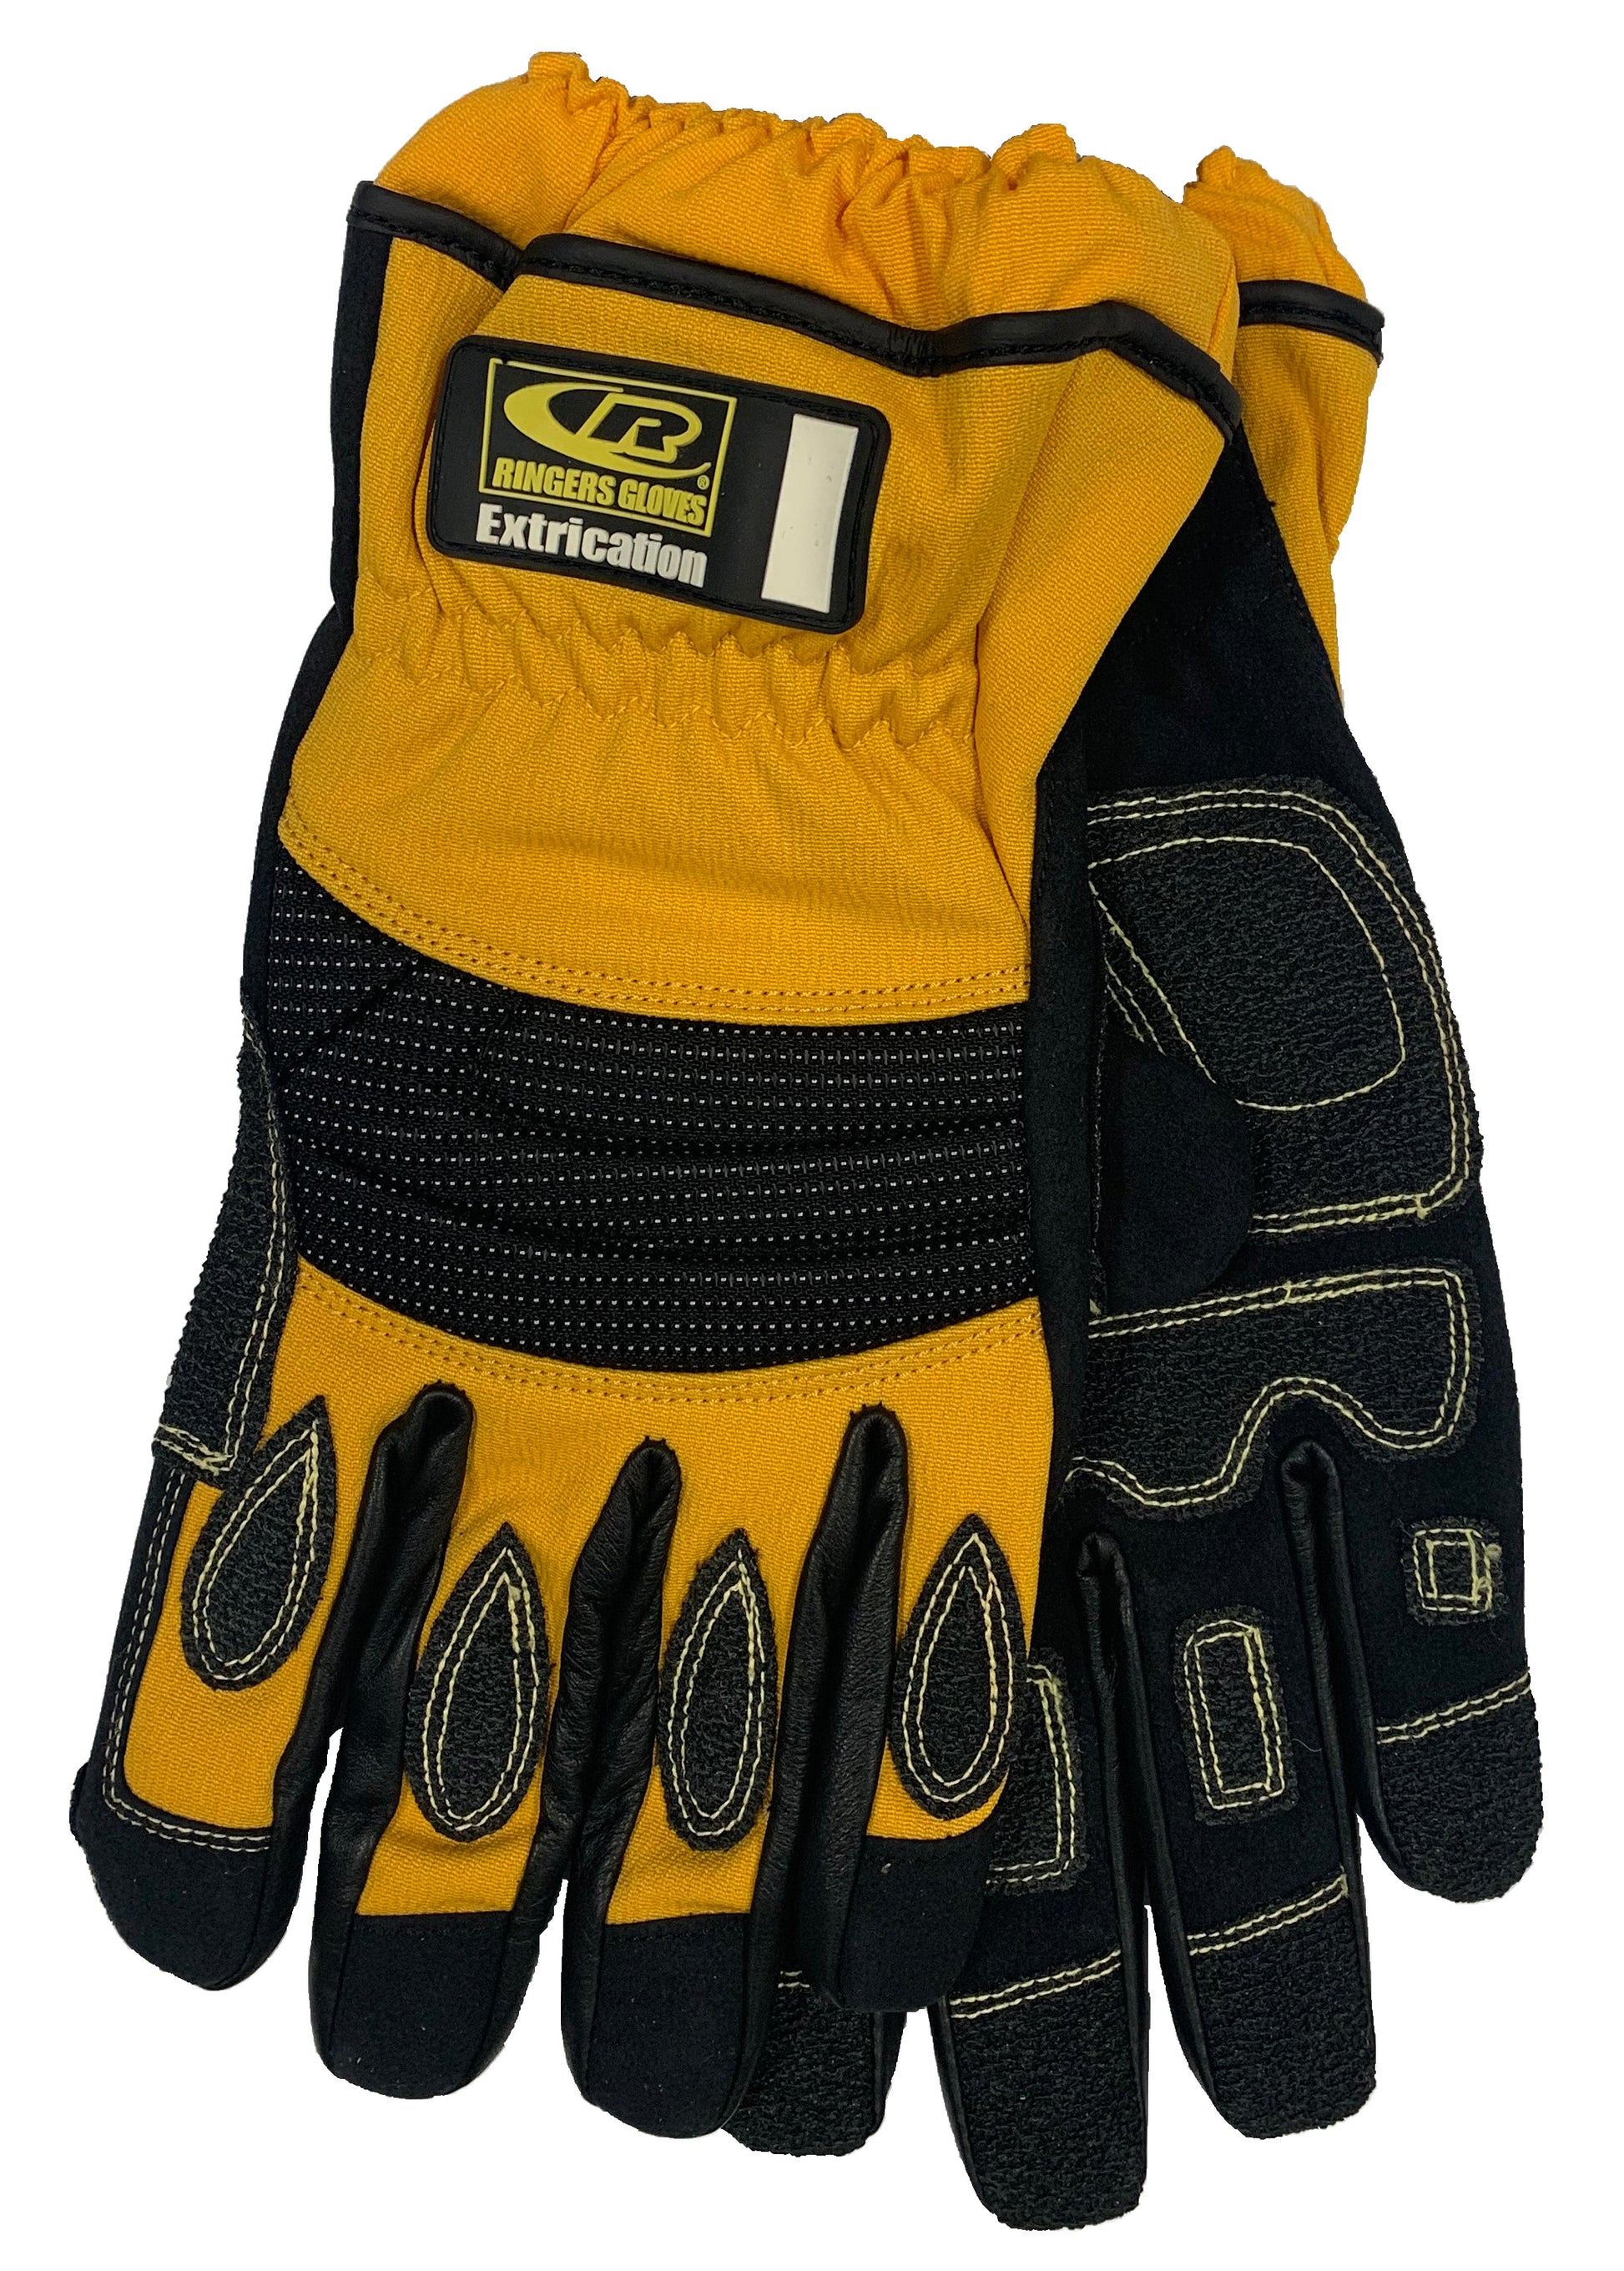 Ringers Gloves R-314 Extrication Glove (Old Style), Yellow; XXX-Large